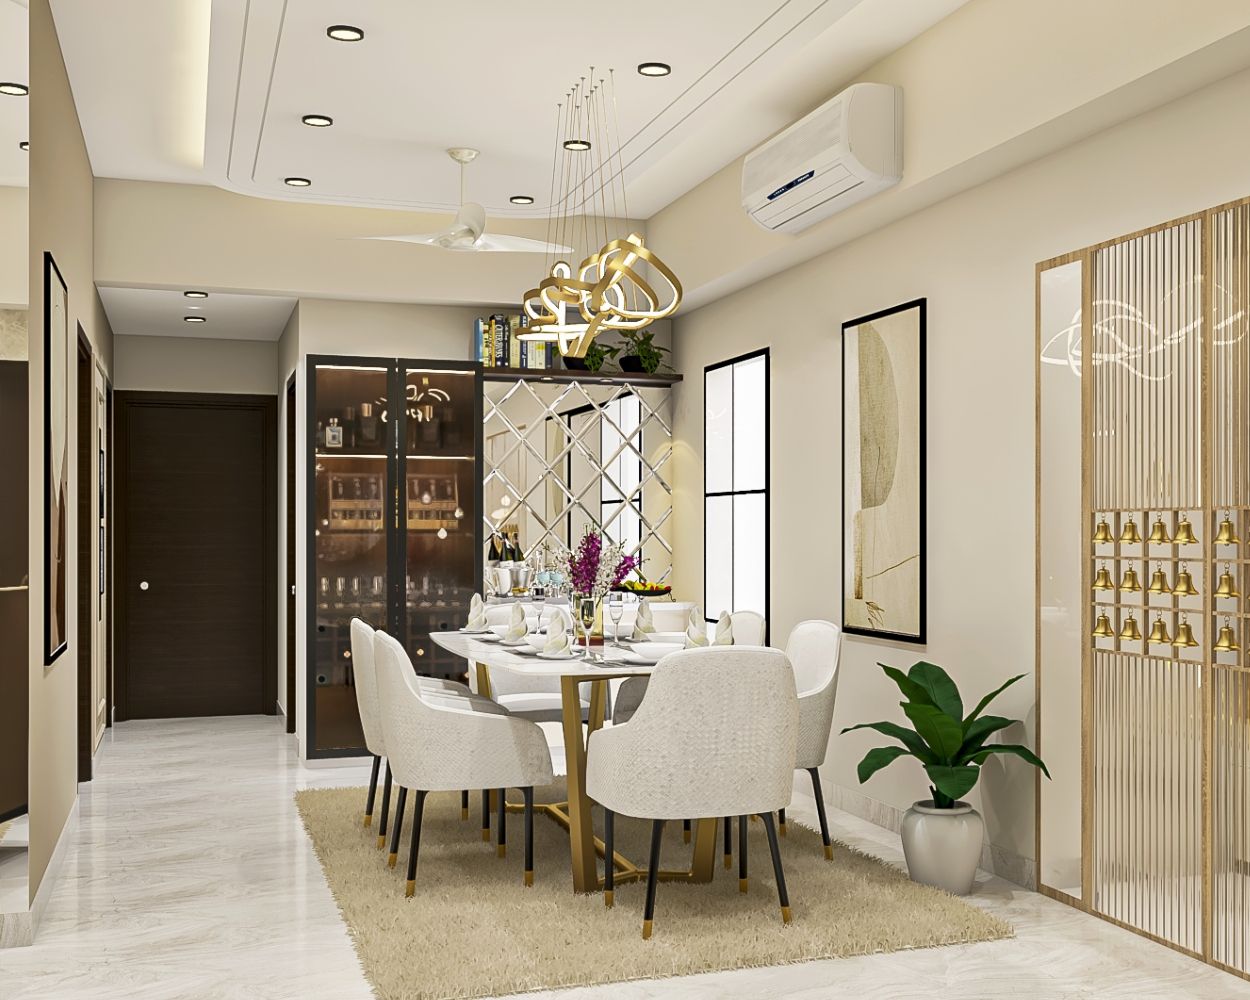 Contemporary White 6-Seater Dining Room Design With Black Frosted Crockery Unit And Bevelled Mirror